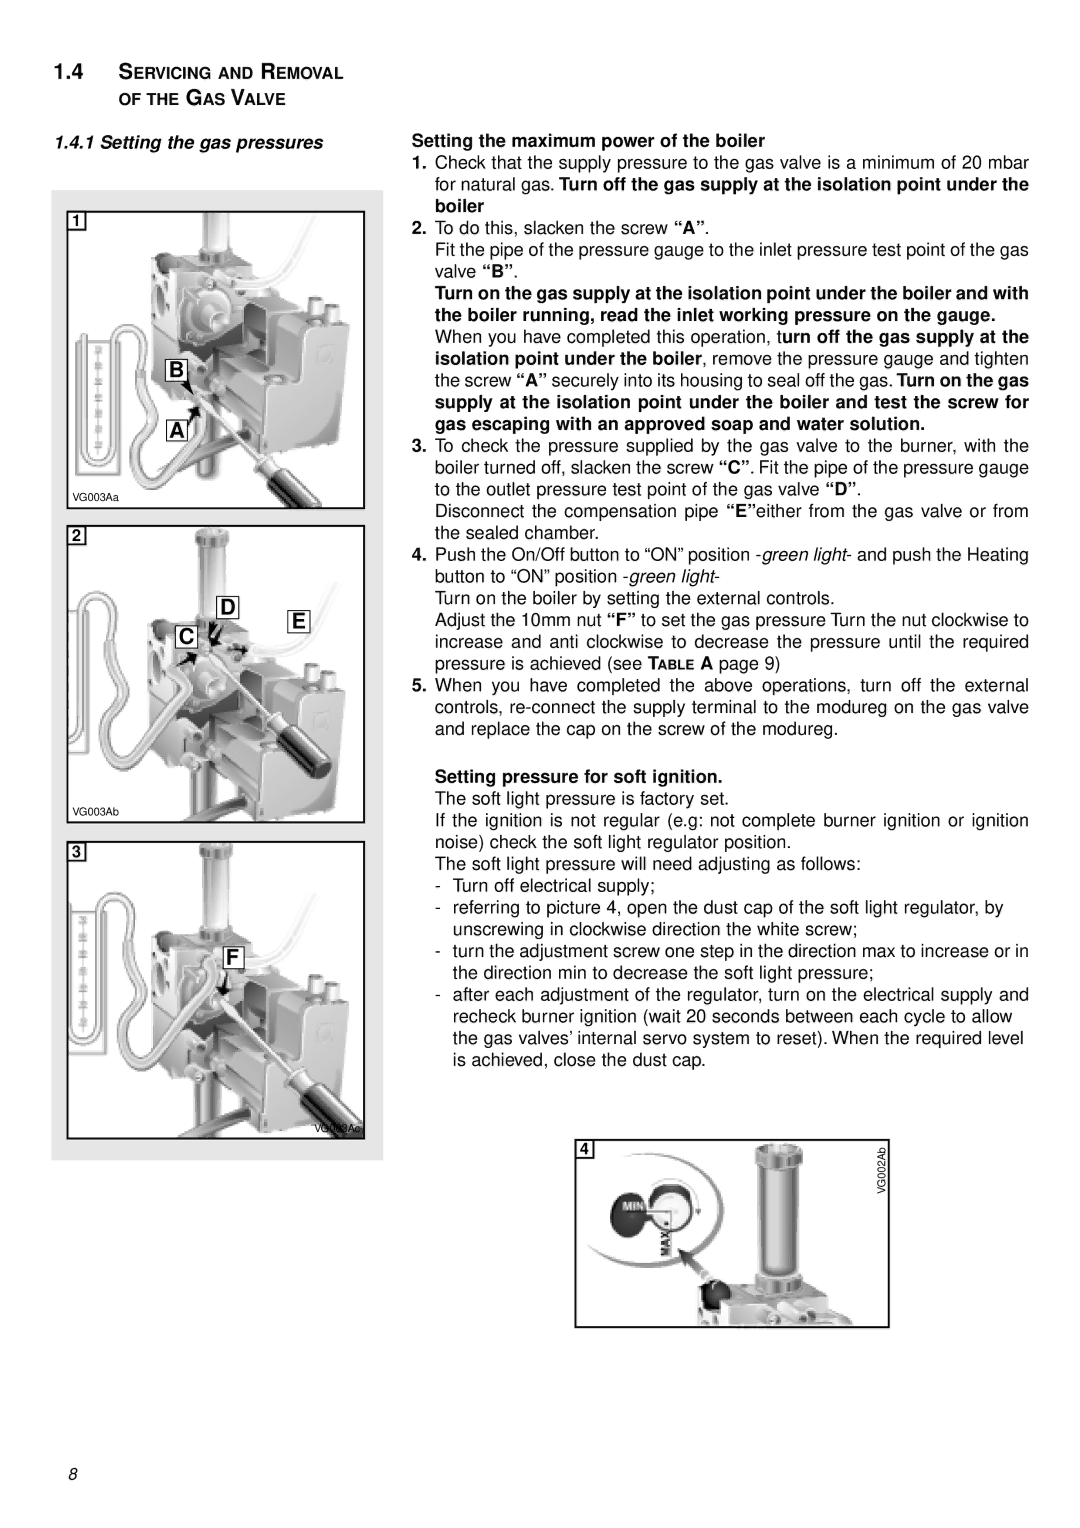 Ariston 41-116-04 installation instructions Setting the gas pressures, Servicing and Removal of the GAS Valve 